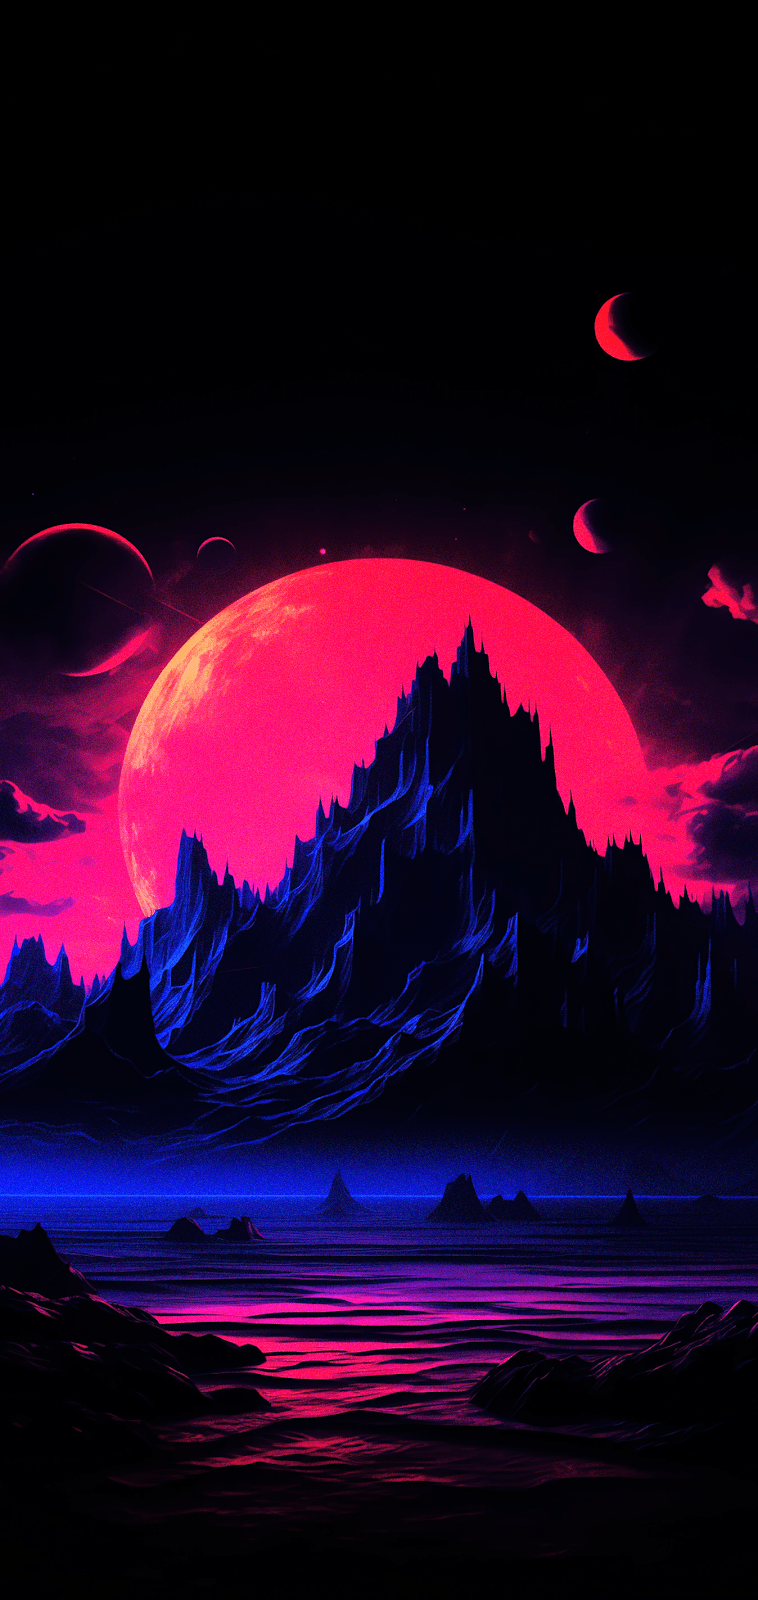 Synthwave Dreams: Night Mountain Fantasy Wallpaper for Phone